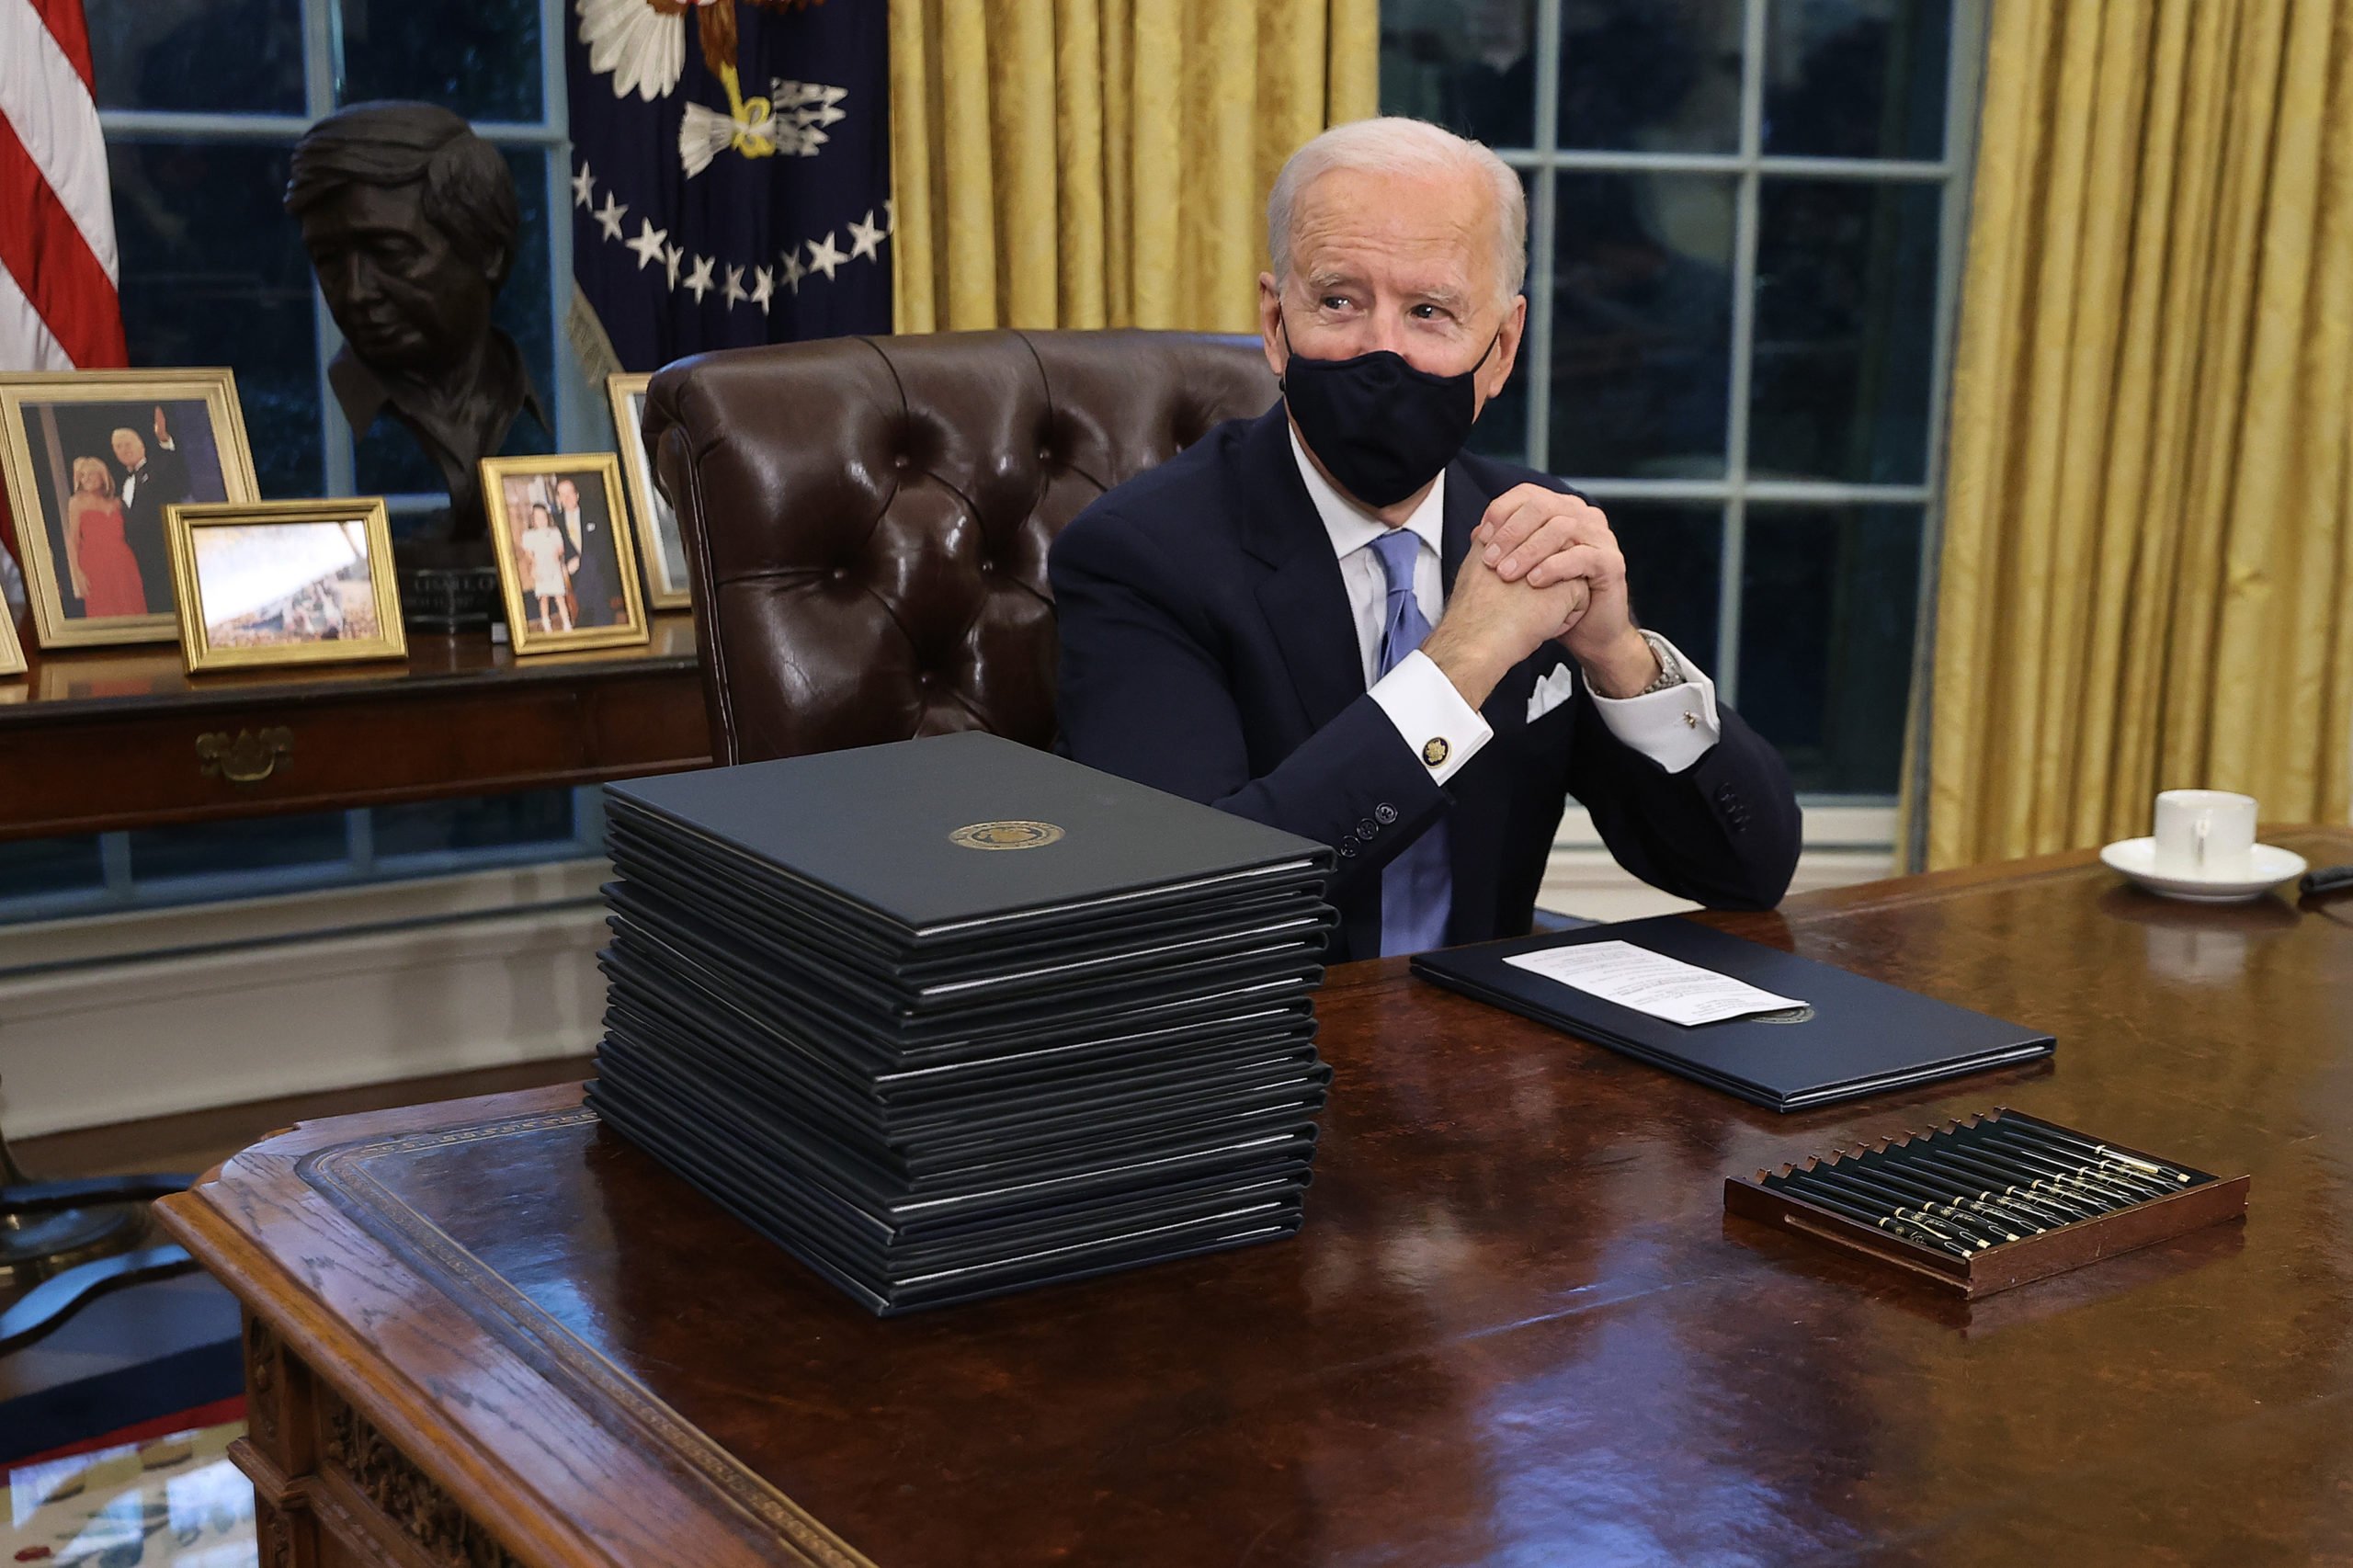 WASHINGTON, DC - JANUARY 20: U.S. President Joe Biden prepares to sign a series of executive orders at the Resolute Desk in the Oval Office just hours after his inauguration on January 20, 2021 in Washington, DC. Biden became the 46th president of the United States earlier today during the ceremony at the U.S. Capitol. (Photo by Chip Somodevilla/Getty Images)